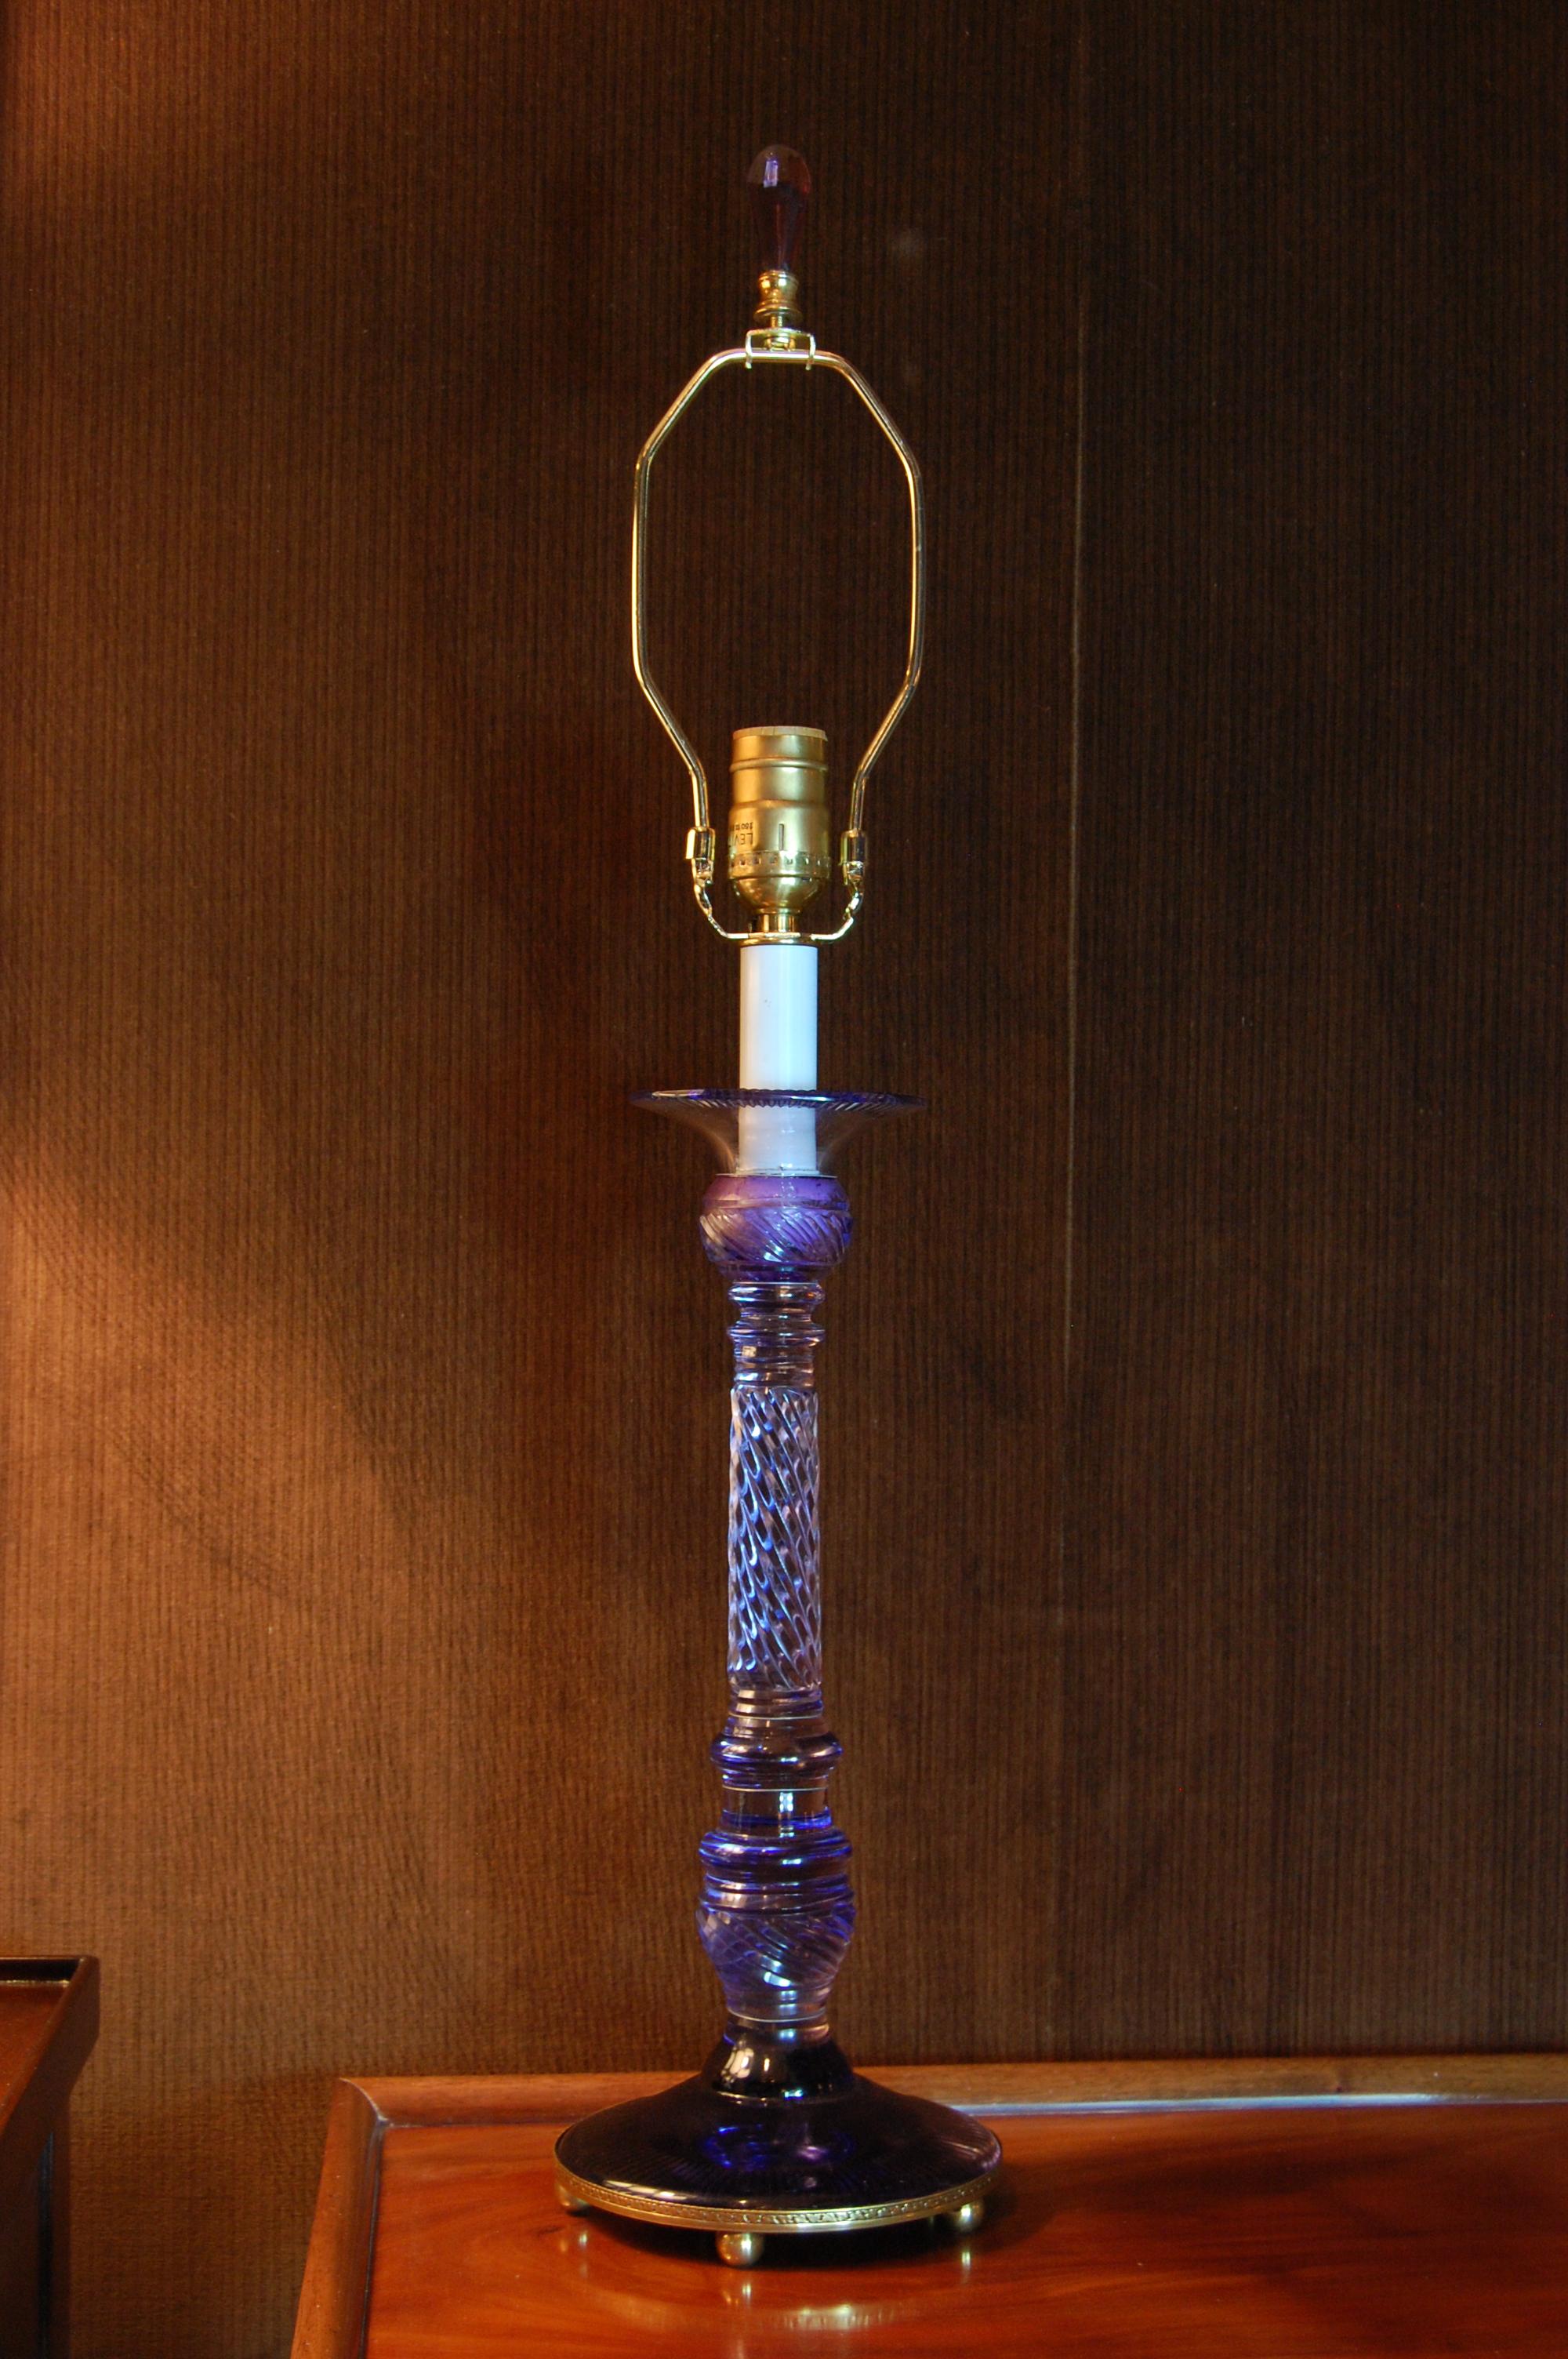 Early 20th Century Amethyst Cut-Glass Candlestick Wired as a Lamp, circa 1900